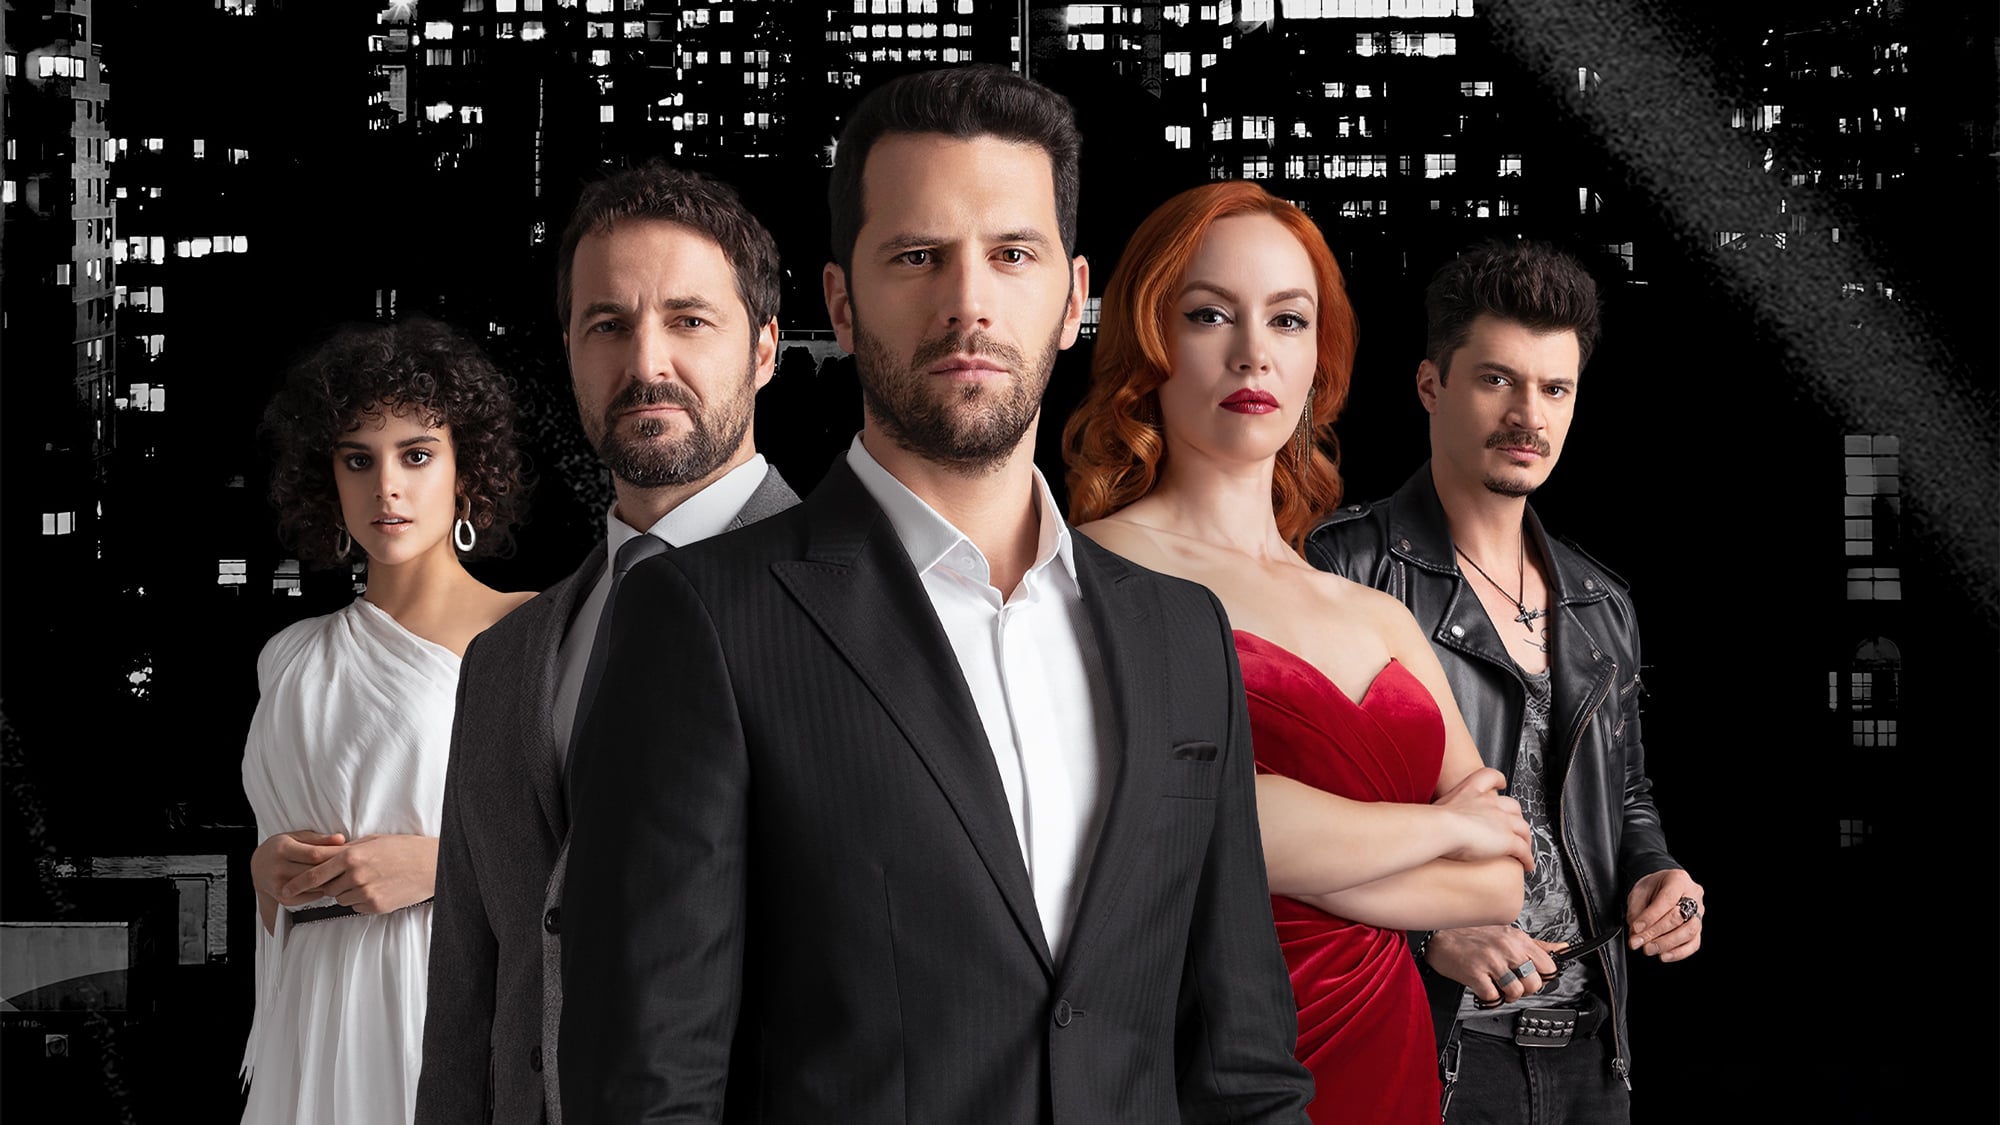 How to Find Romanian Series Online